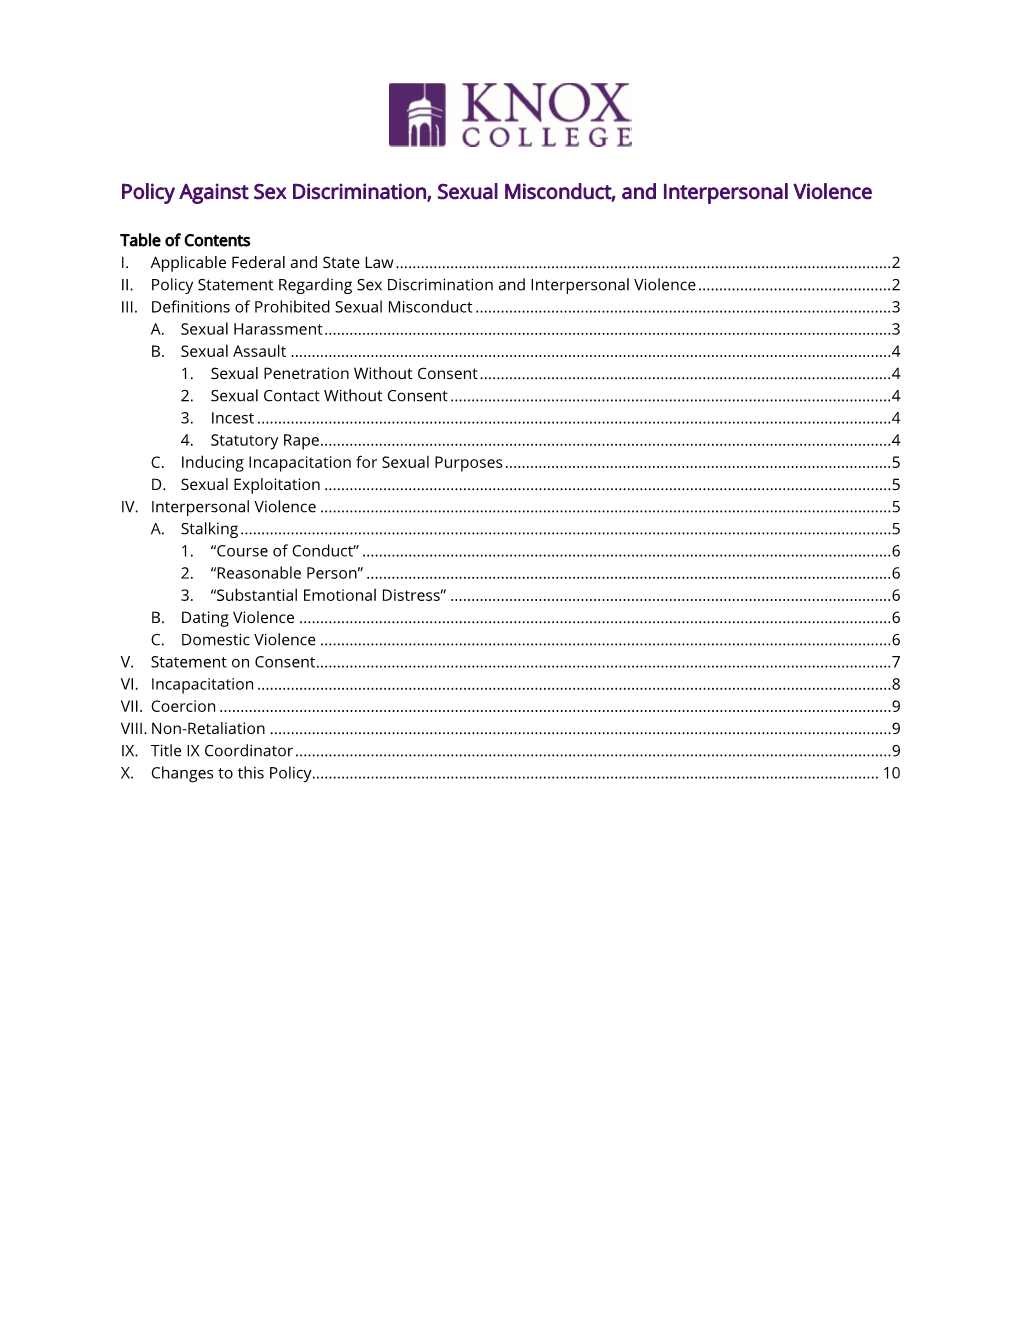 Policy Against Sex Discrimination, Sexual Misconduct, and Interpersonal Violence